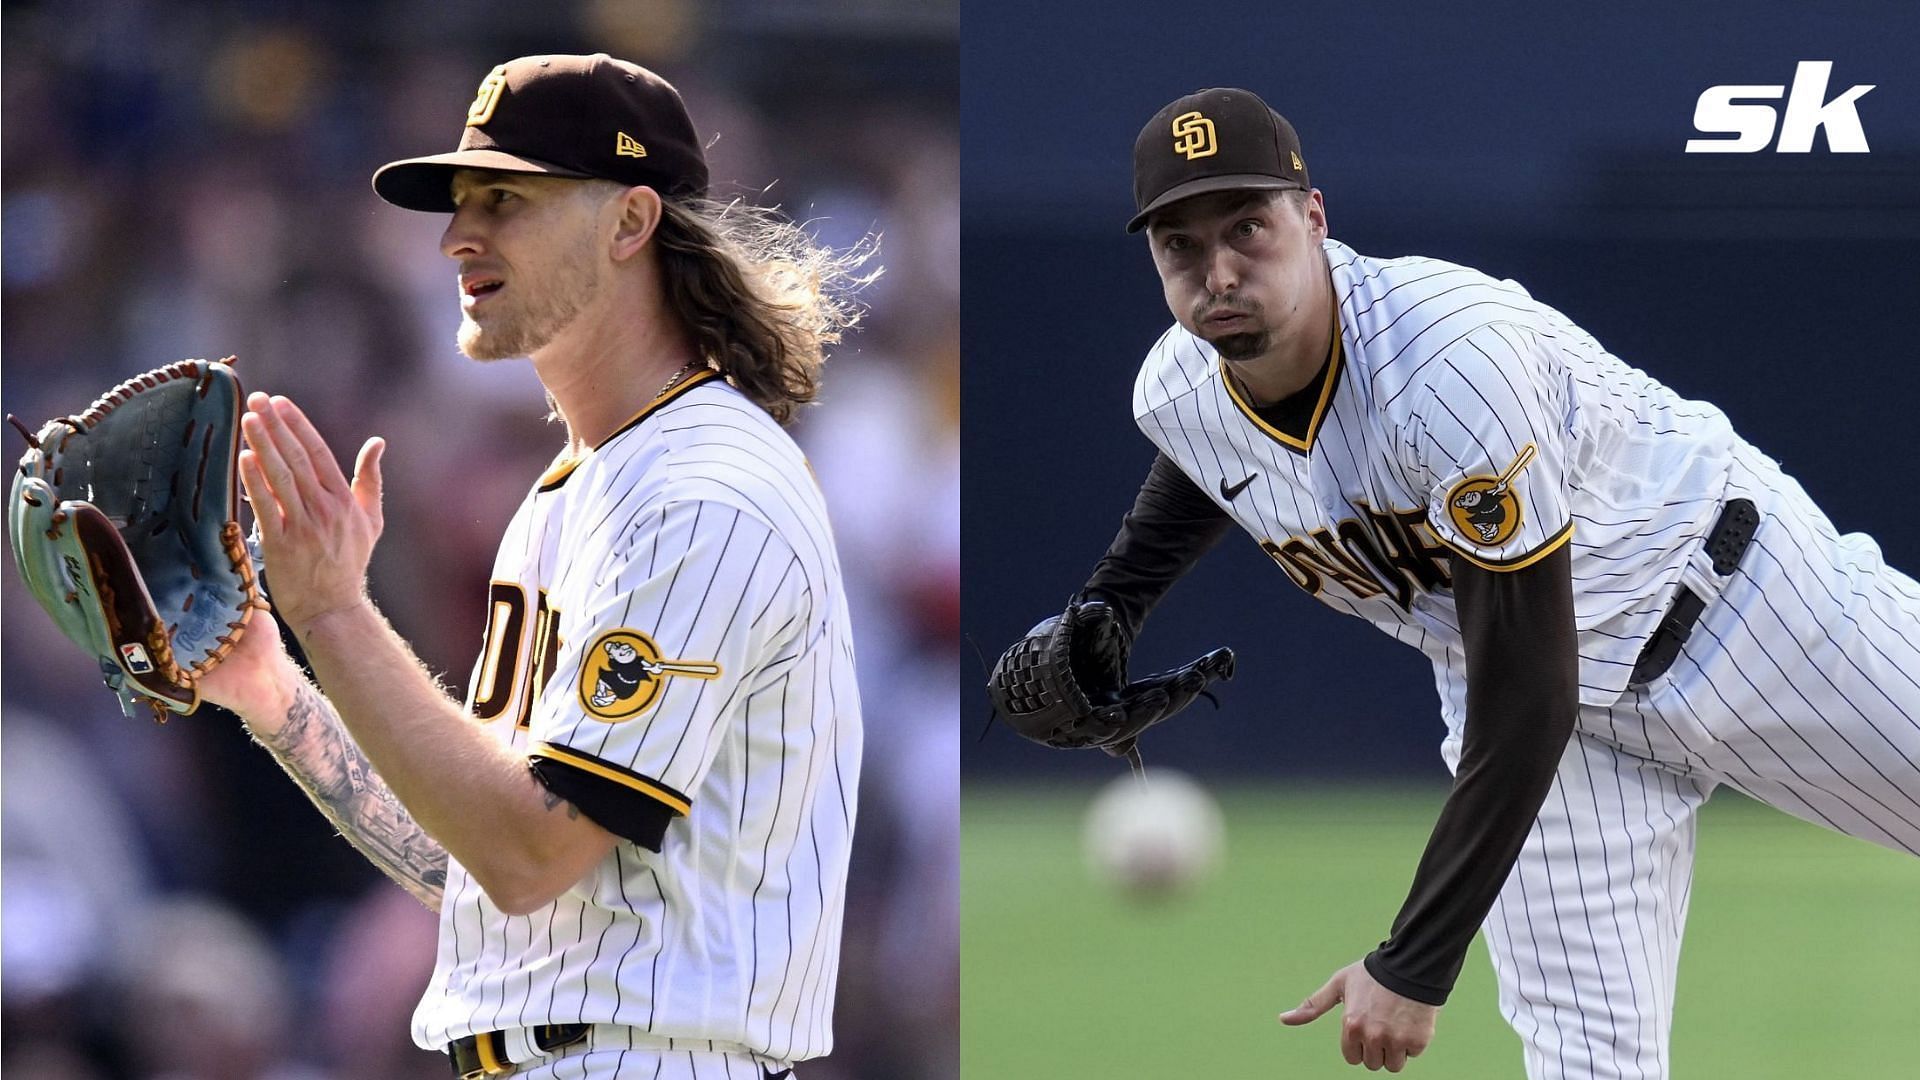 Blake Snell and Josh Hader are some of the notable San Diego Padres that have now entered the free agent market